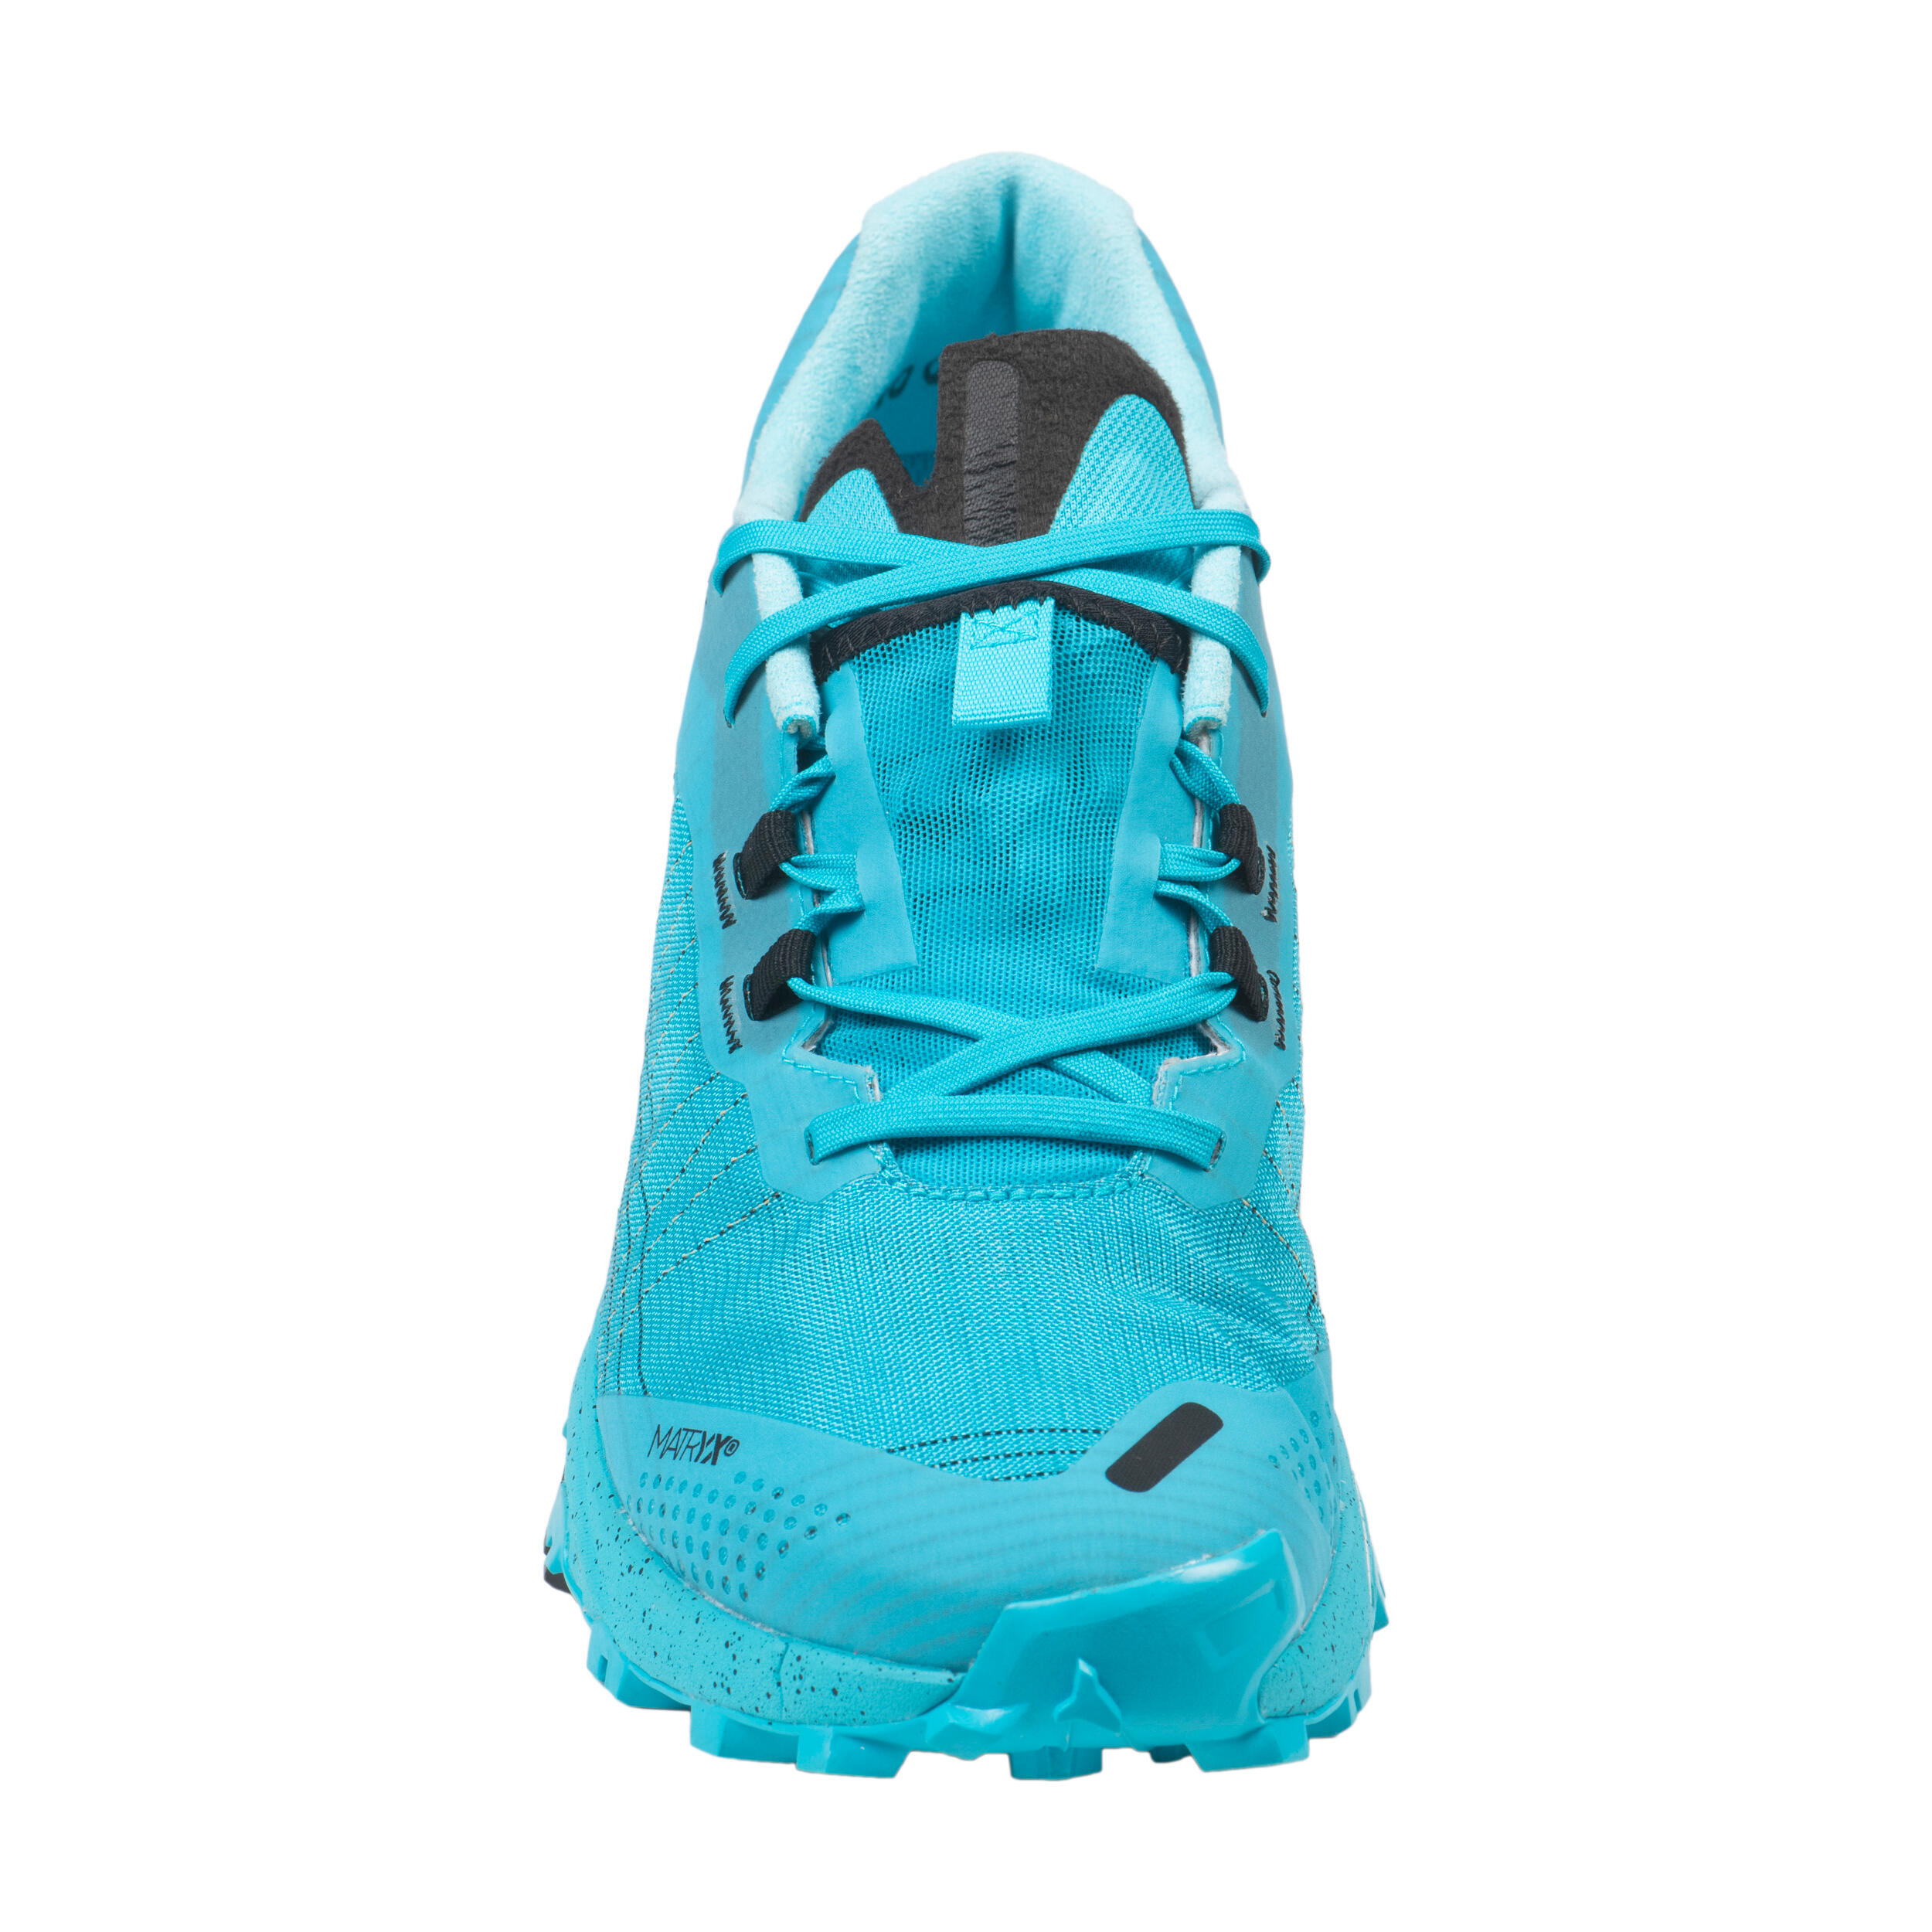 Race Light Men's Trail Running Shoes - sky blue and black 5/15